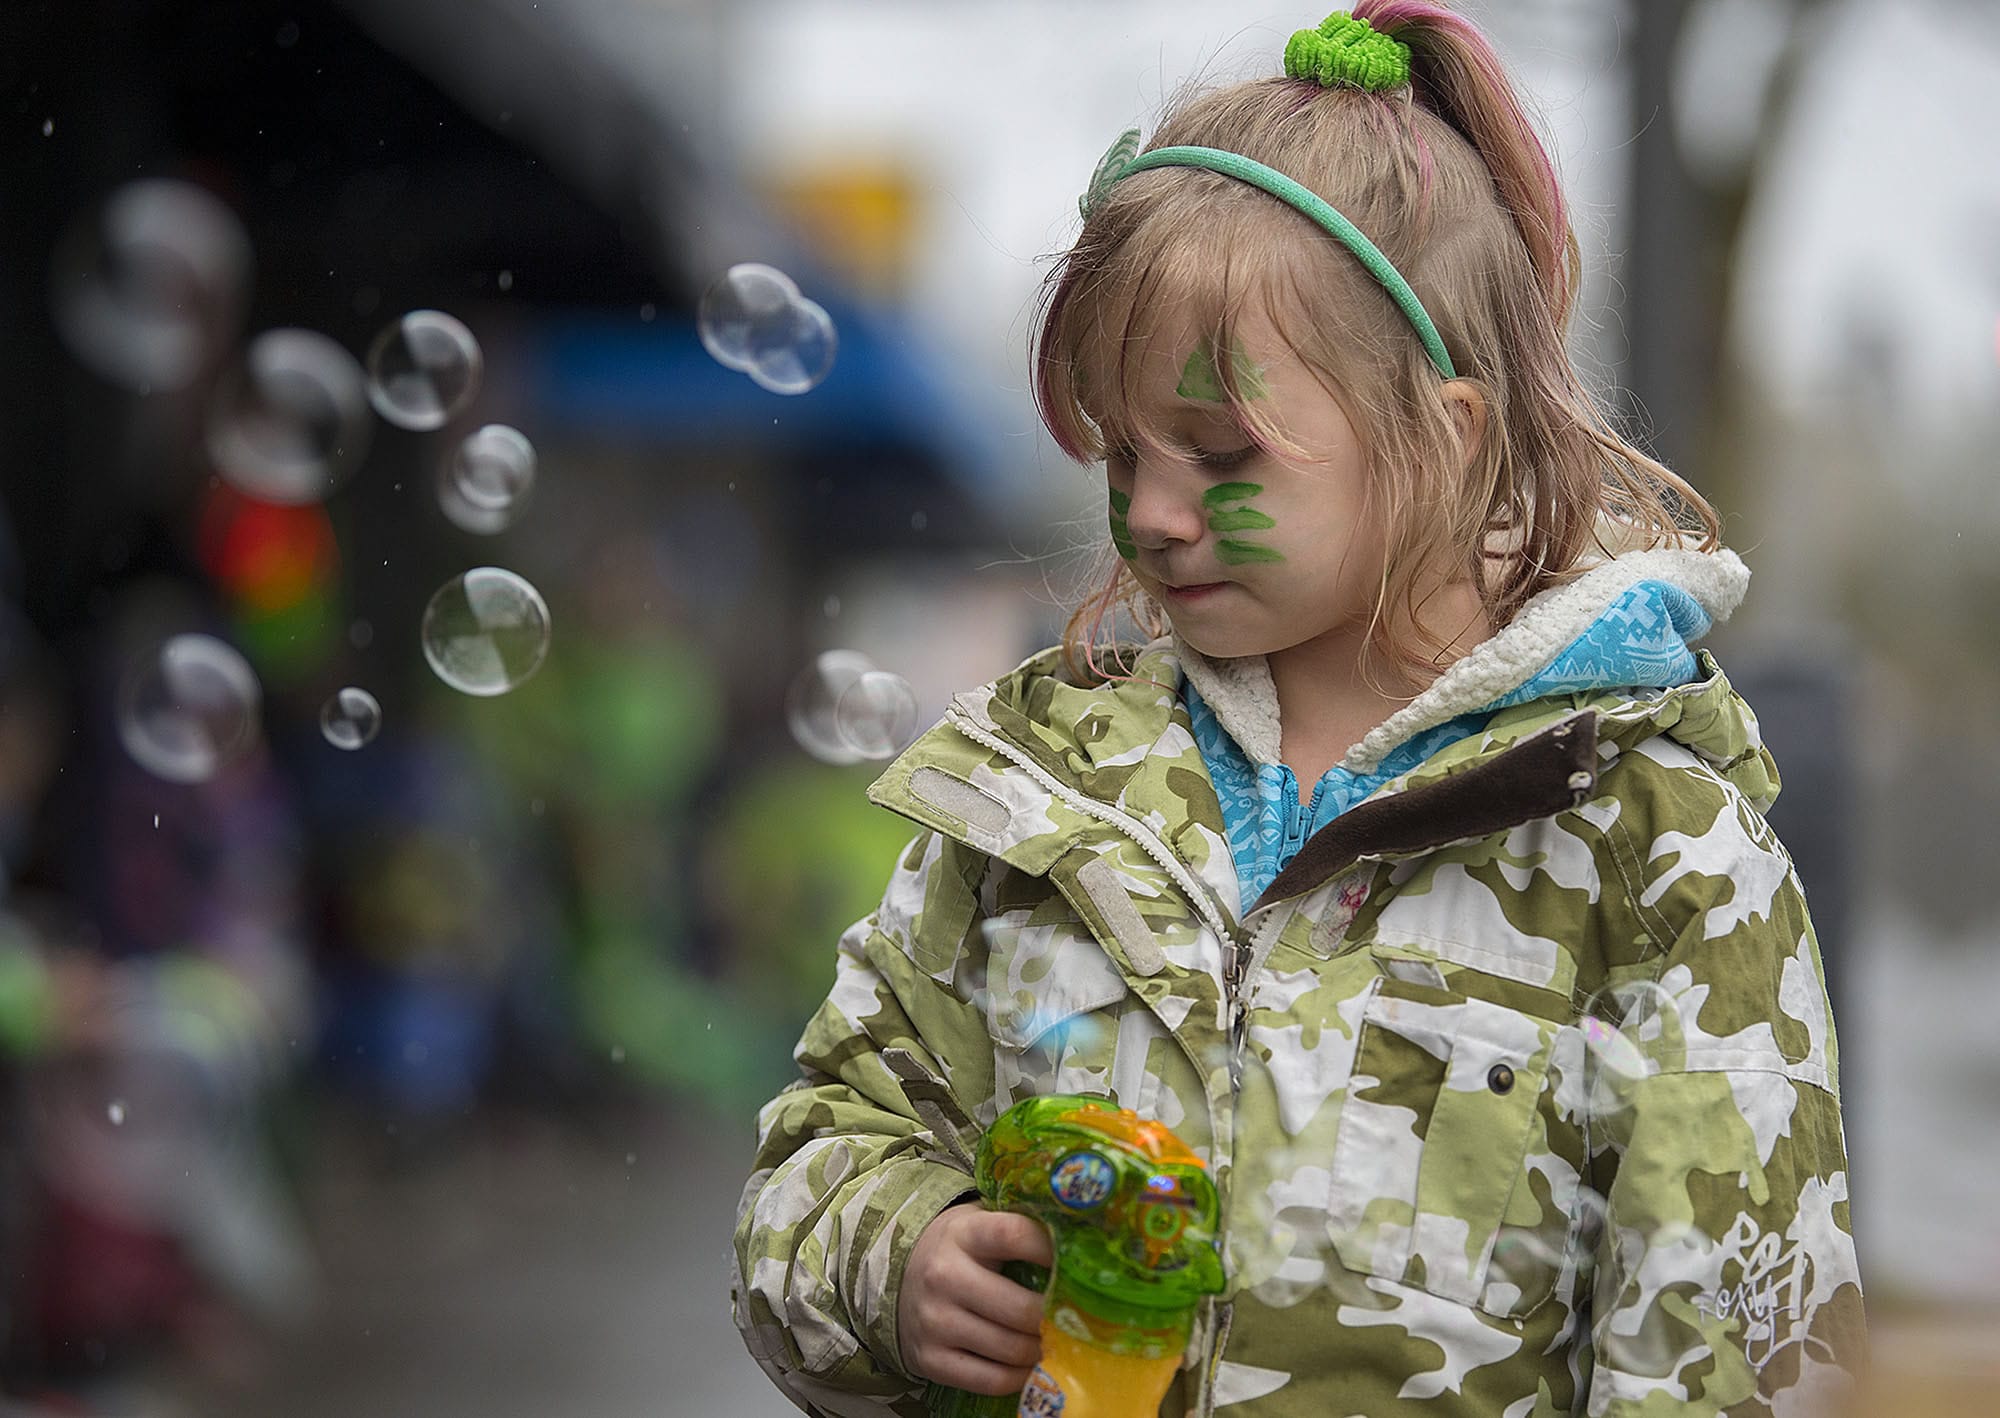 Six-year-old Abbygale Harris of Vancouver gets into the spirit of the holiday with festive green face painting and bubbles while waiting in Uptown Village for the annual Paddy Hough Parade to start Friday afternoon, March 17, 2017.